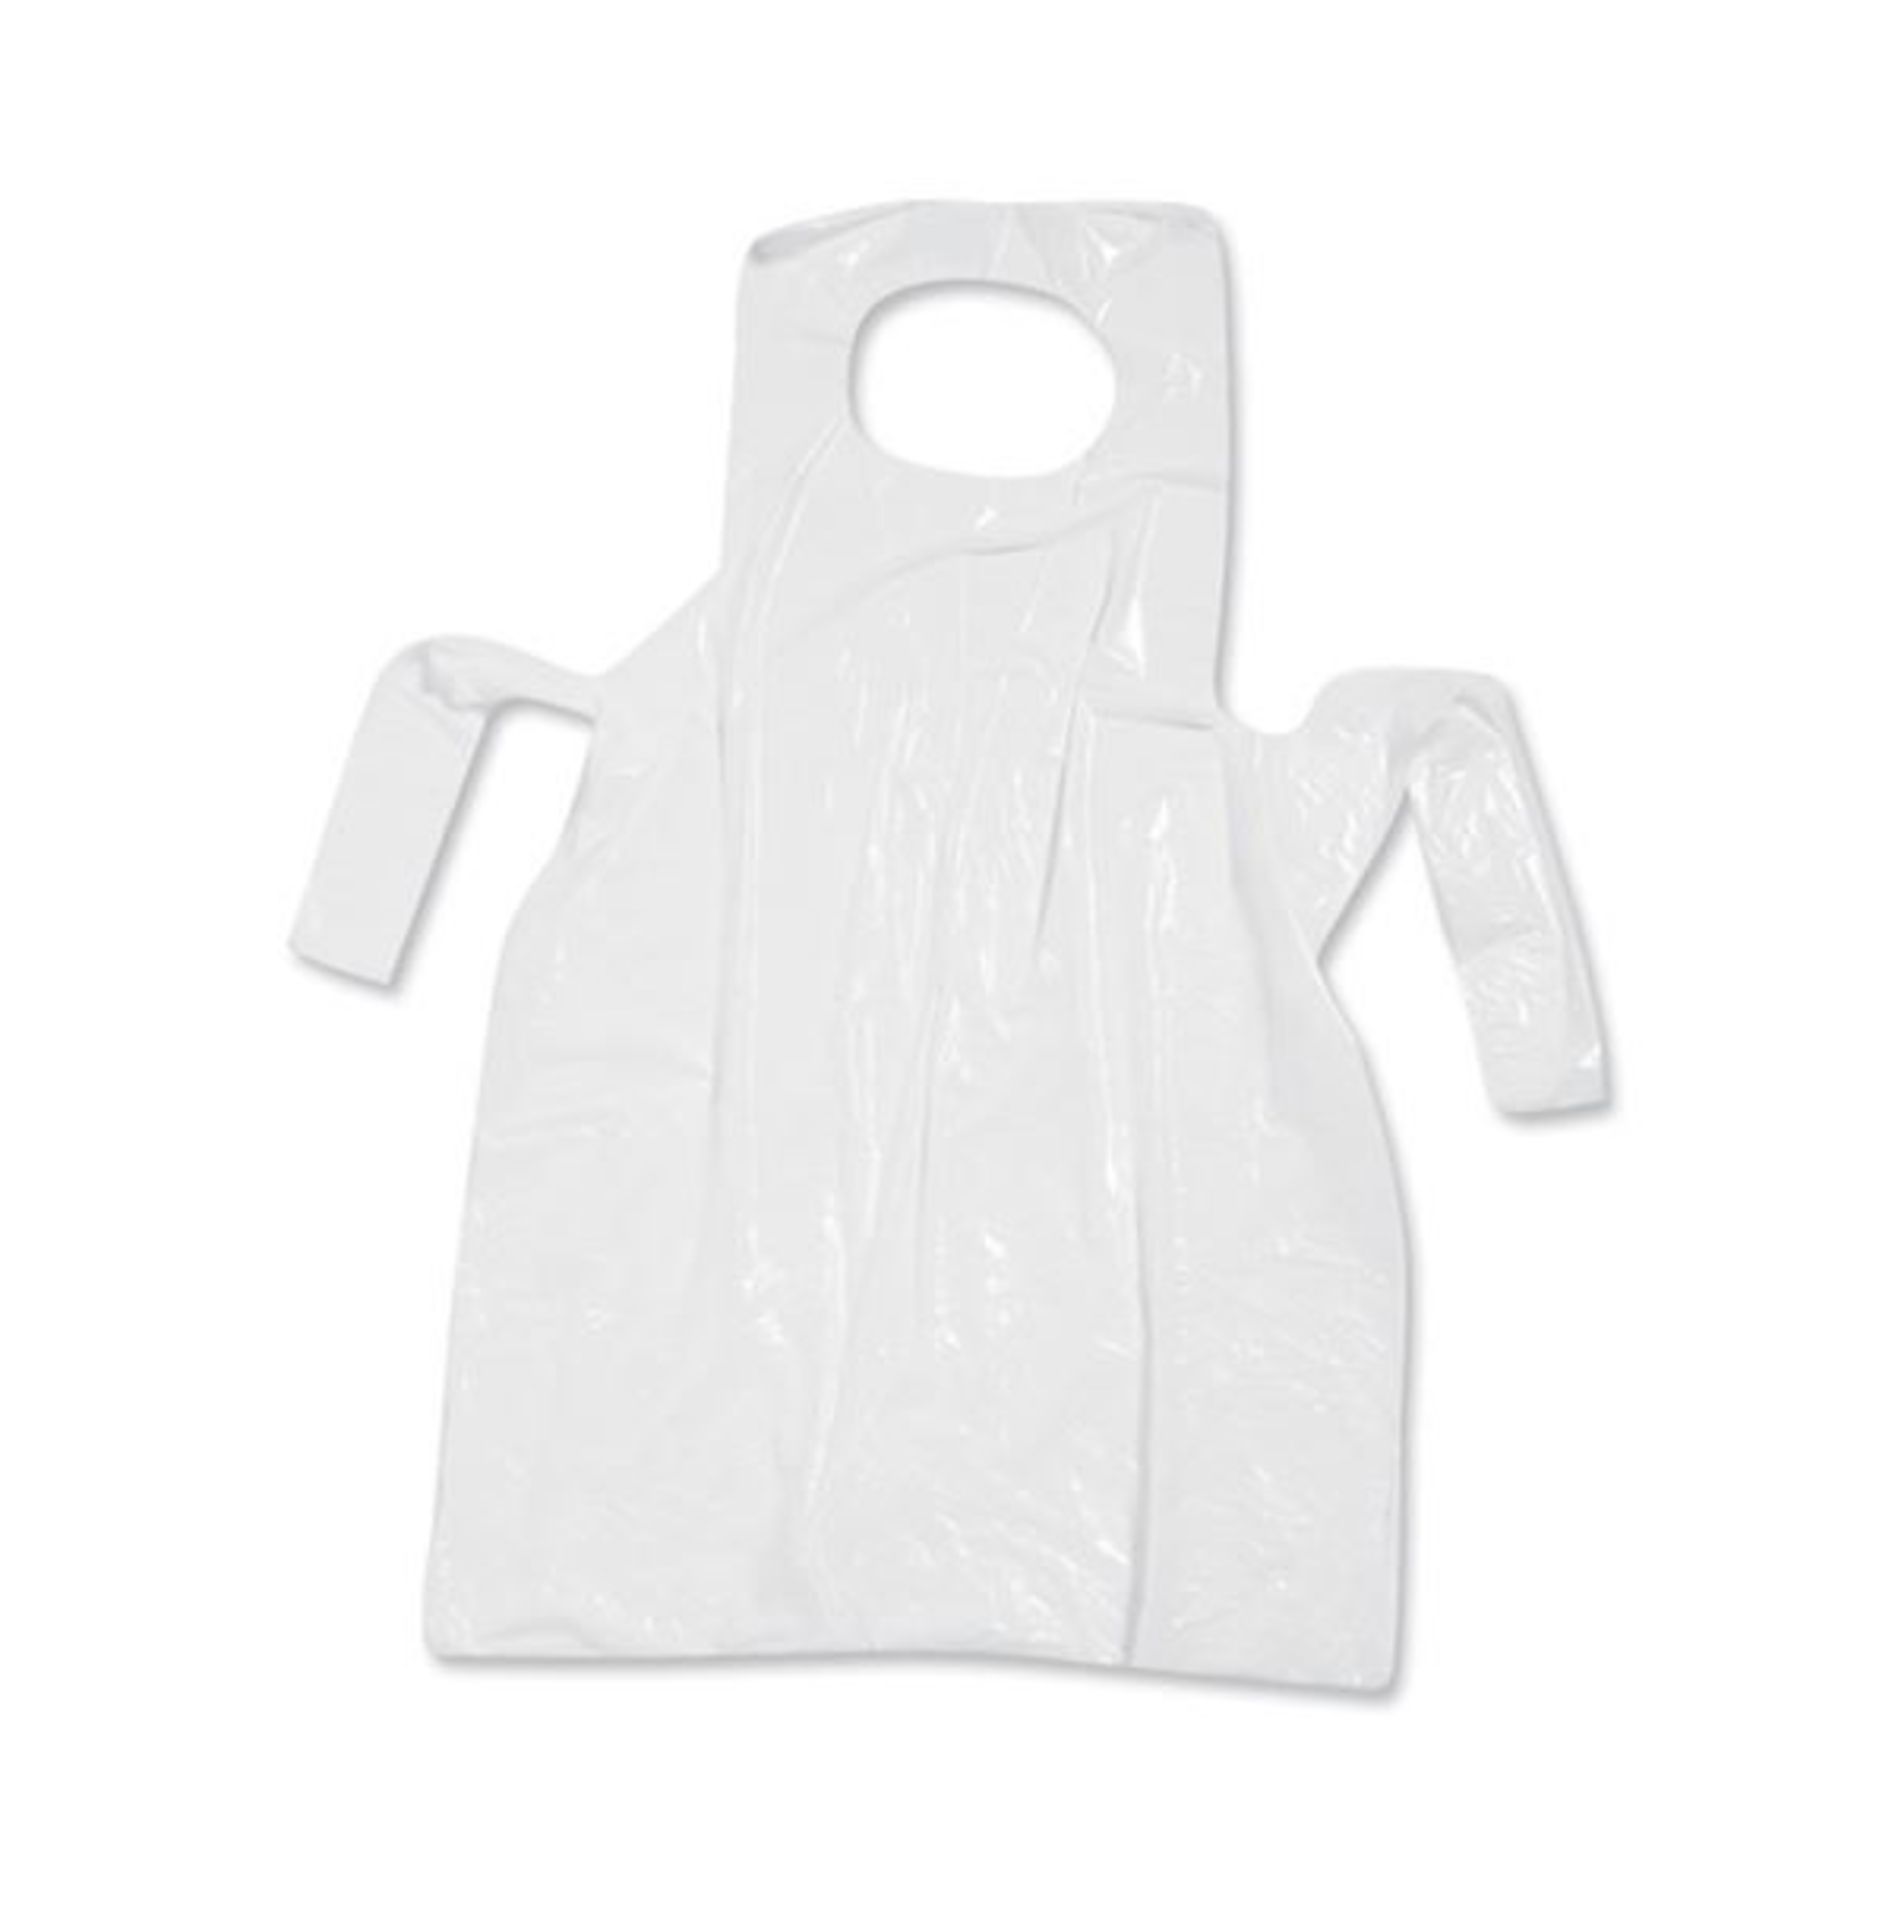 Lot of 1000 x Disposable Aprons